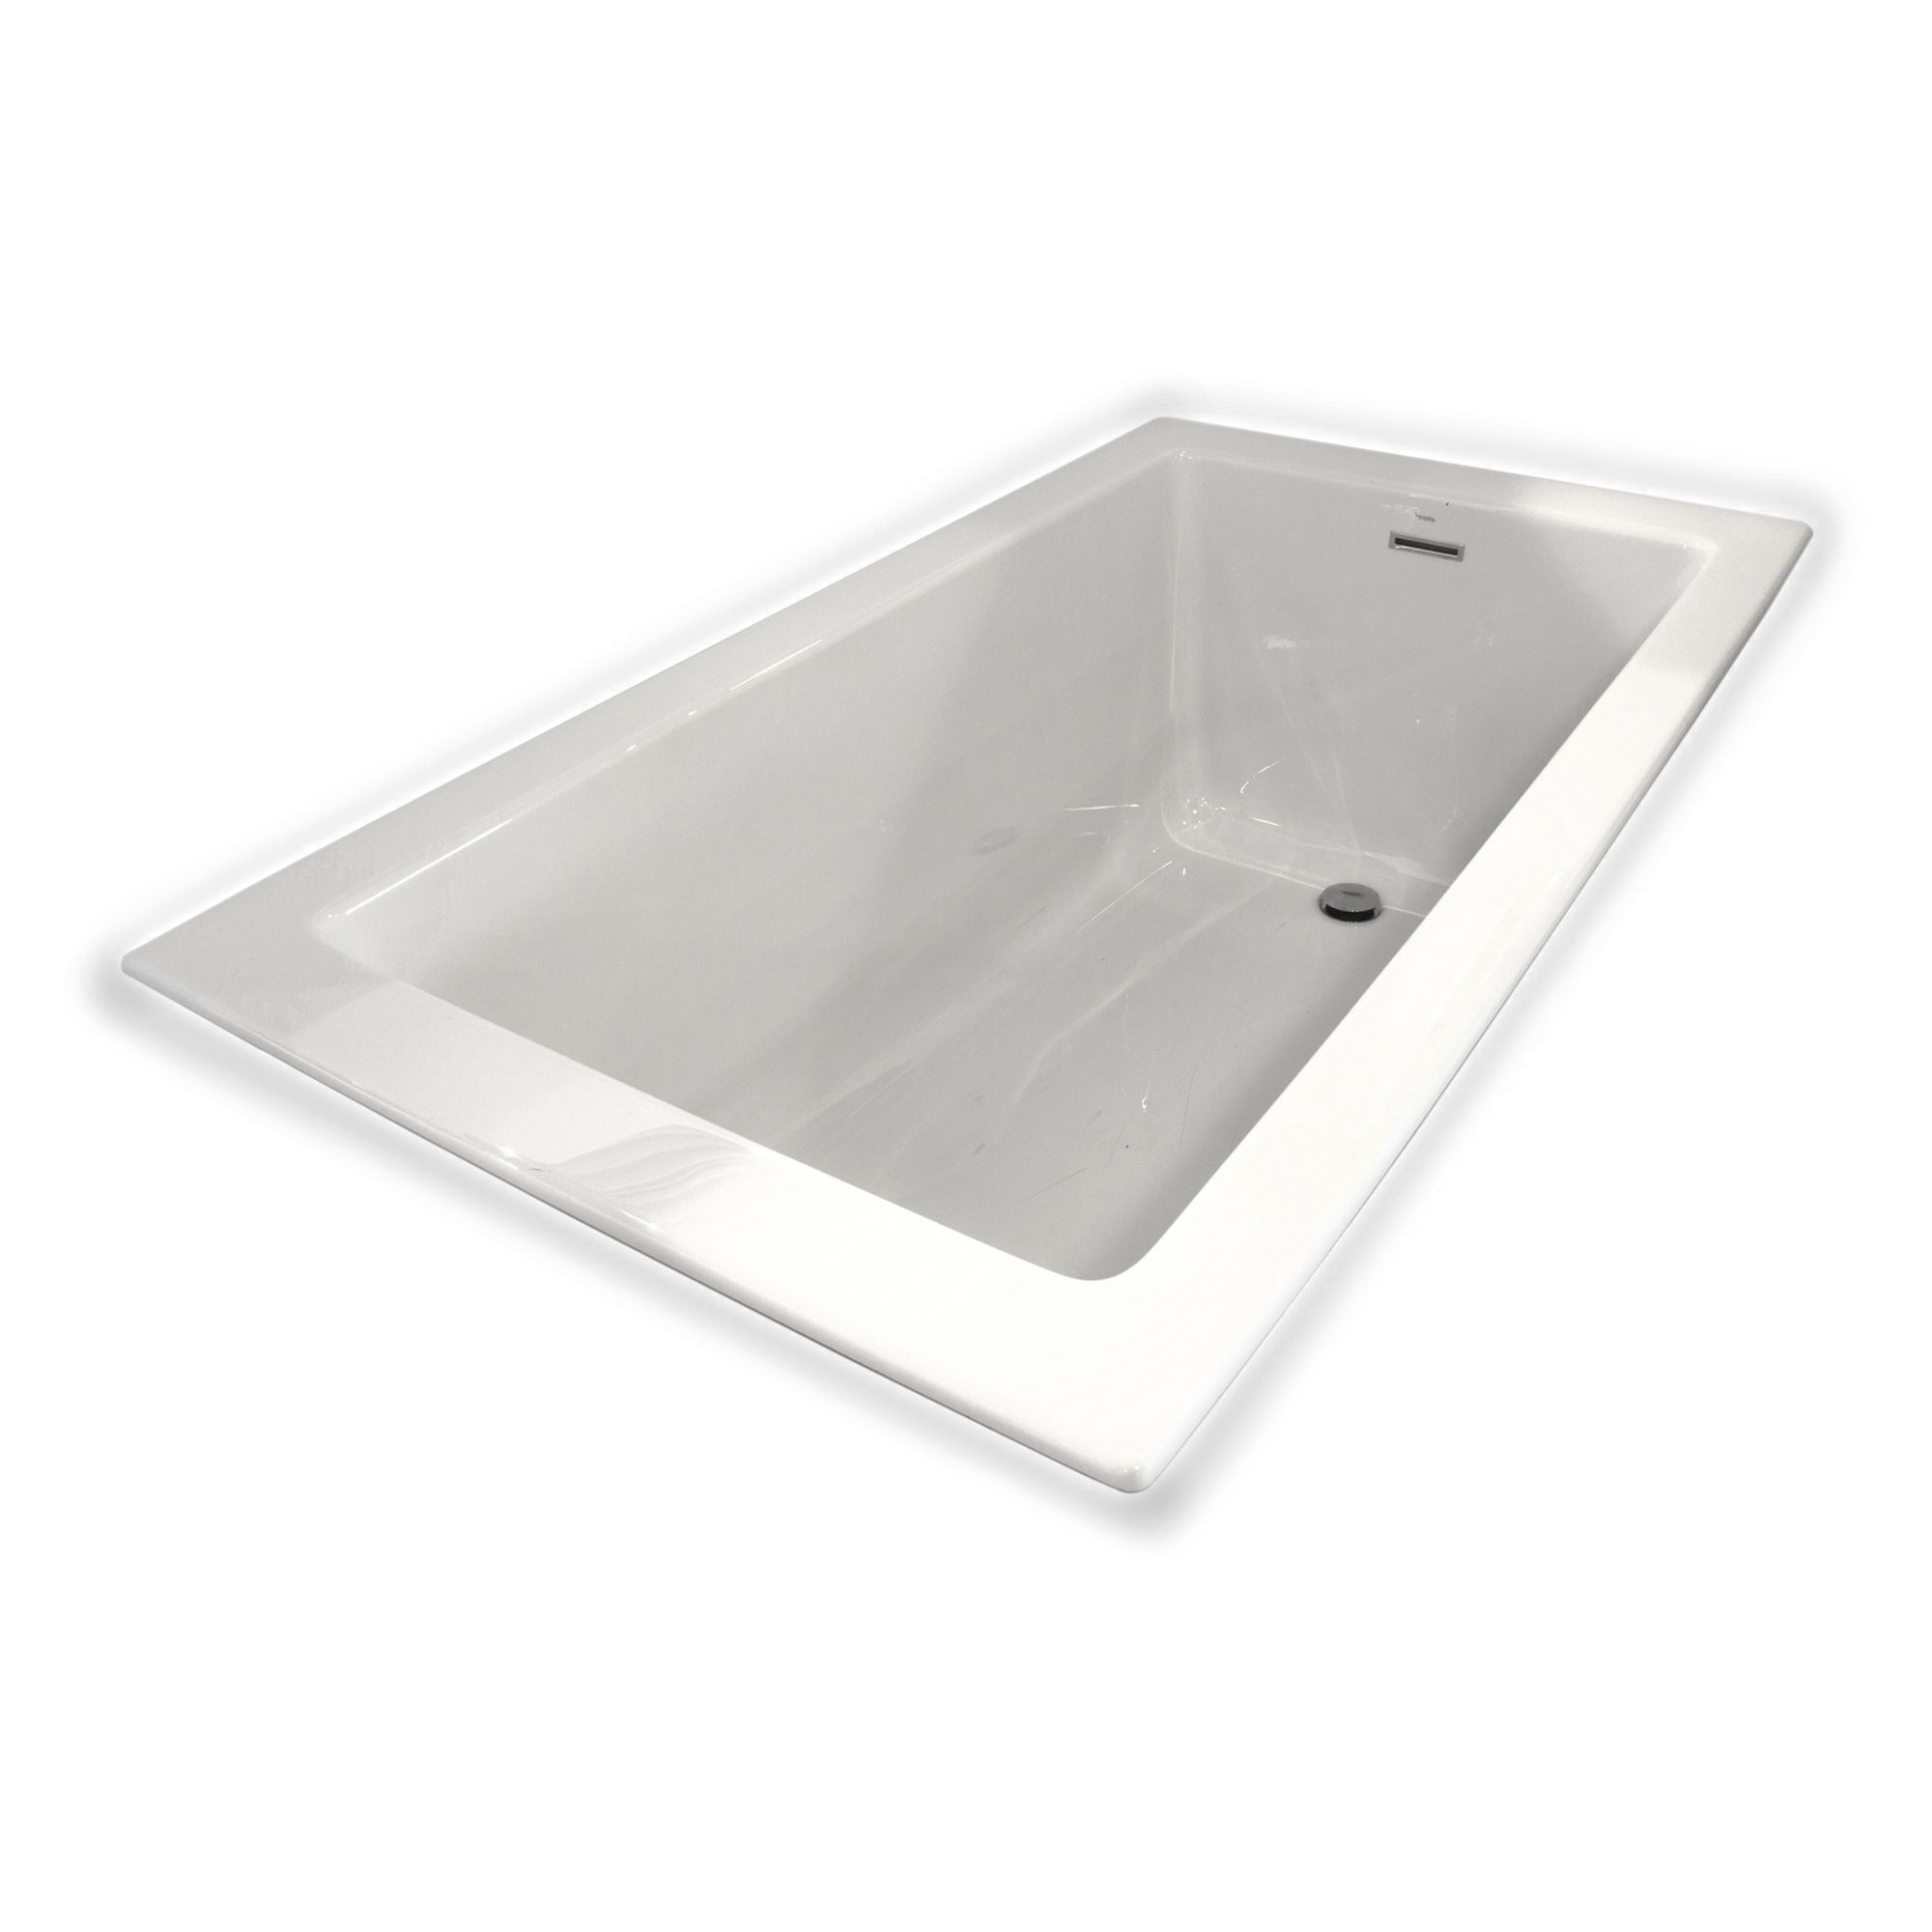 The Zone bathtub is clean and modern with a thin, flat deck and a gently sloping backrest.